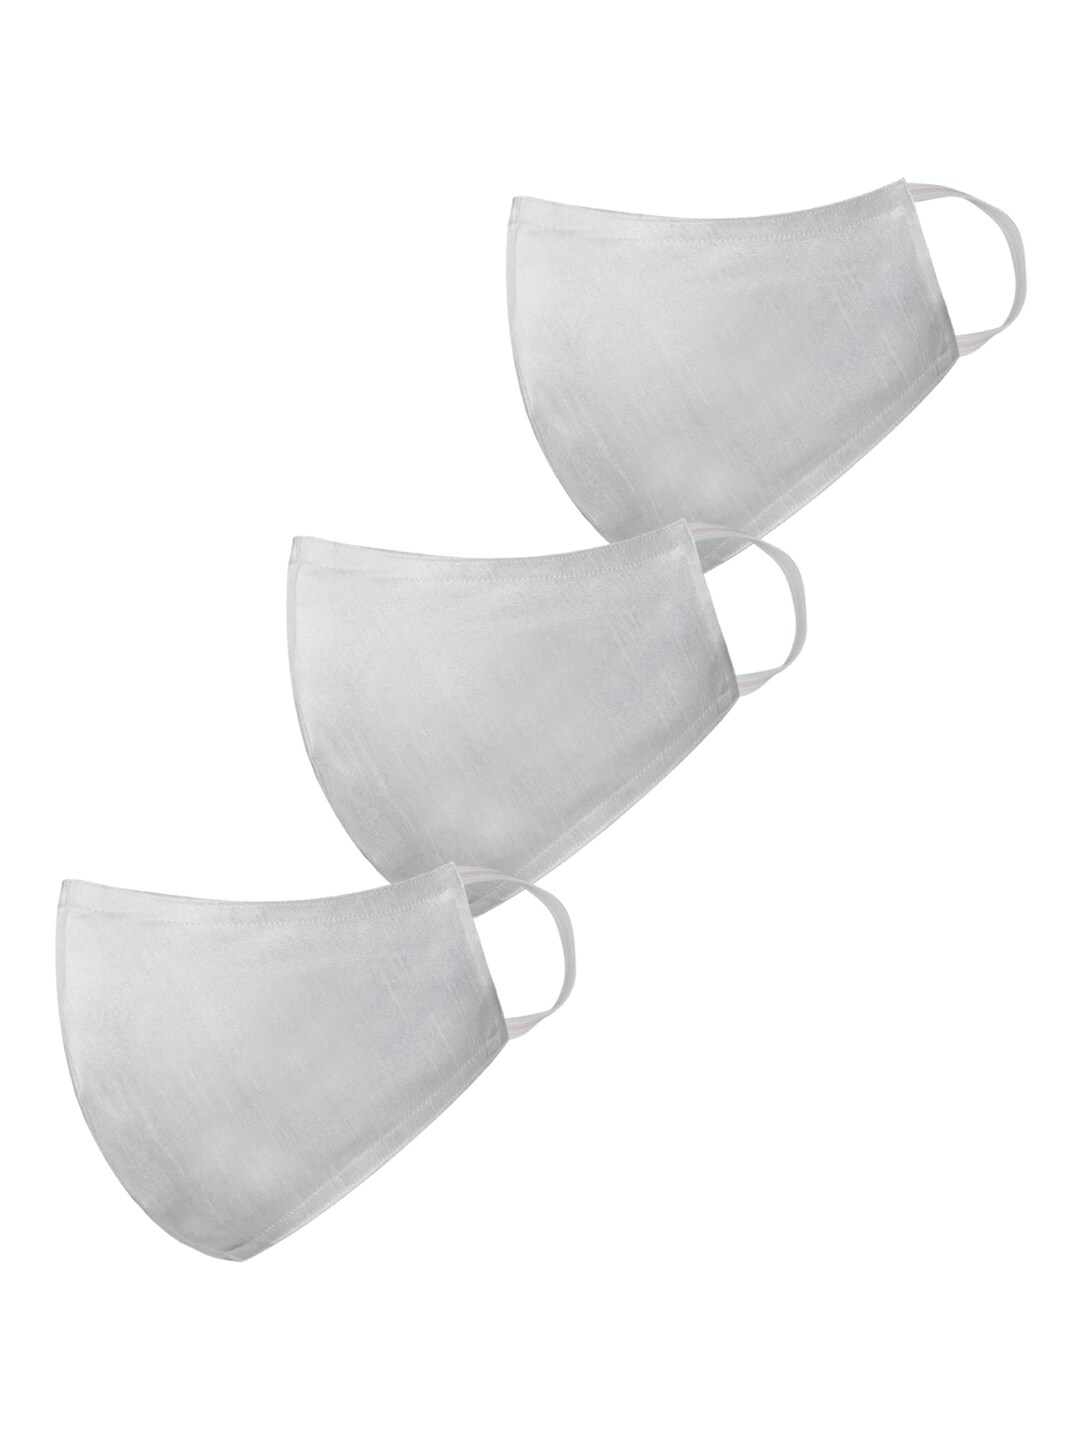 VASTRAMAY Unisex 3Pcs Off-White Reusable 3-Ply Anti-Pollution Protective Outdoor Masks Price in India